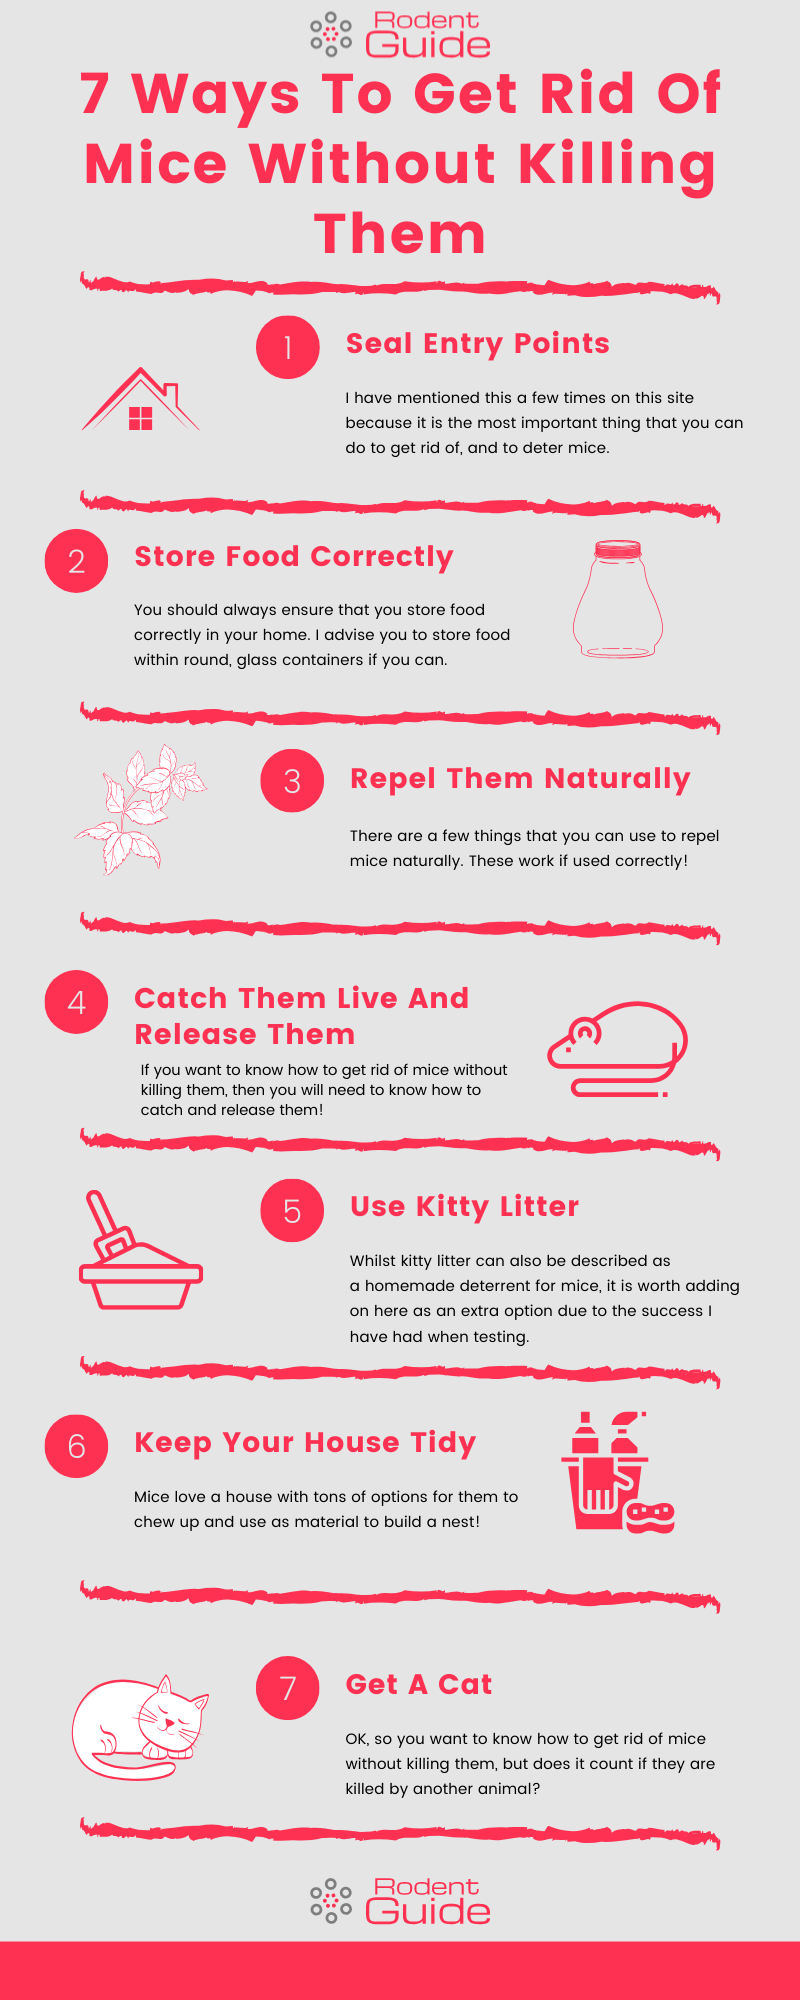 7 Ways To Get Rid Of Mice Without Killing Them